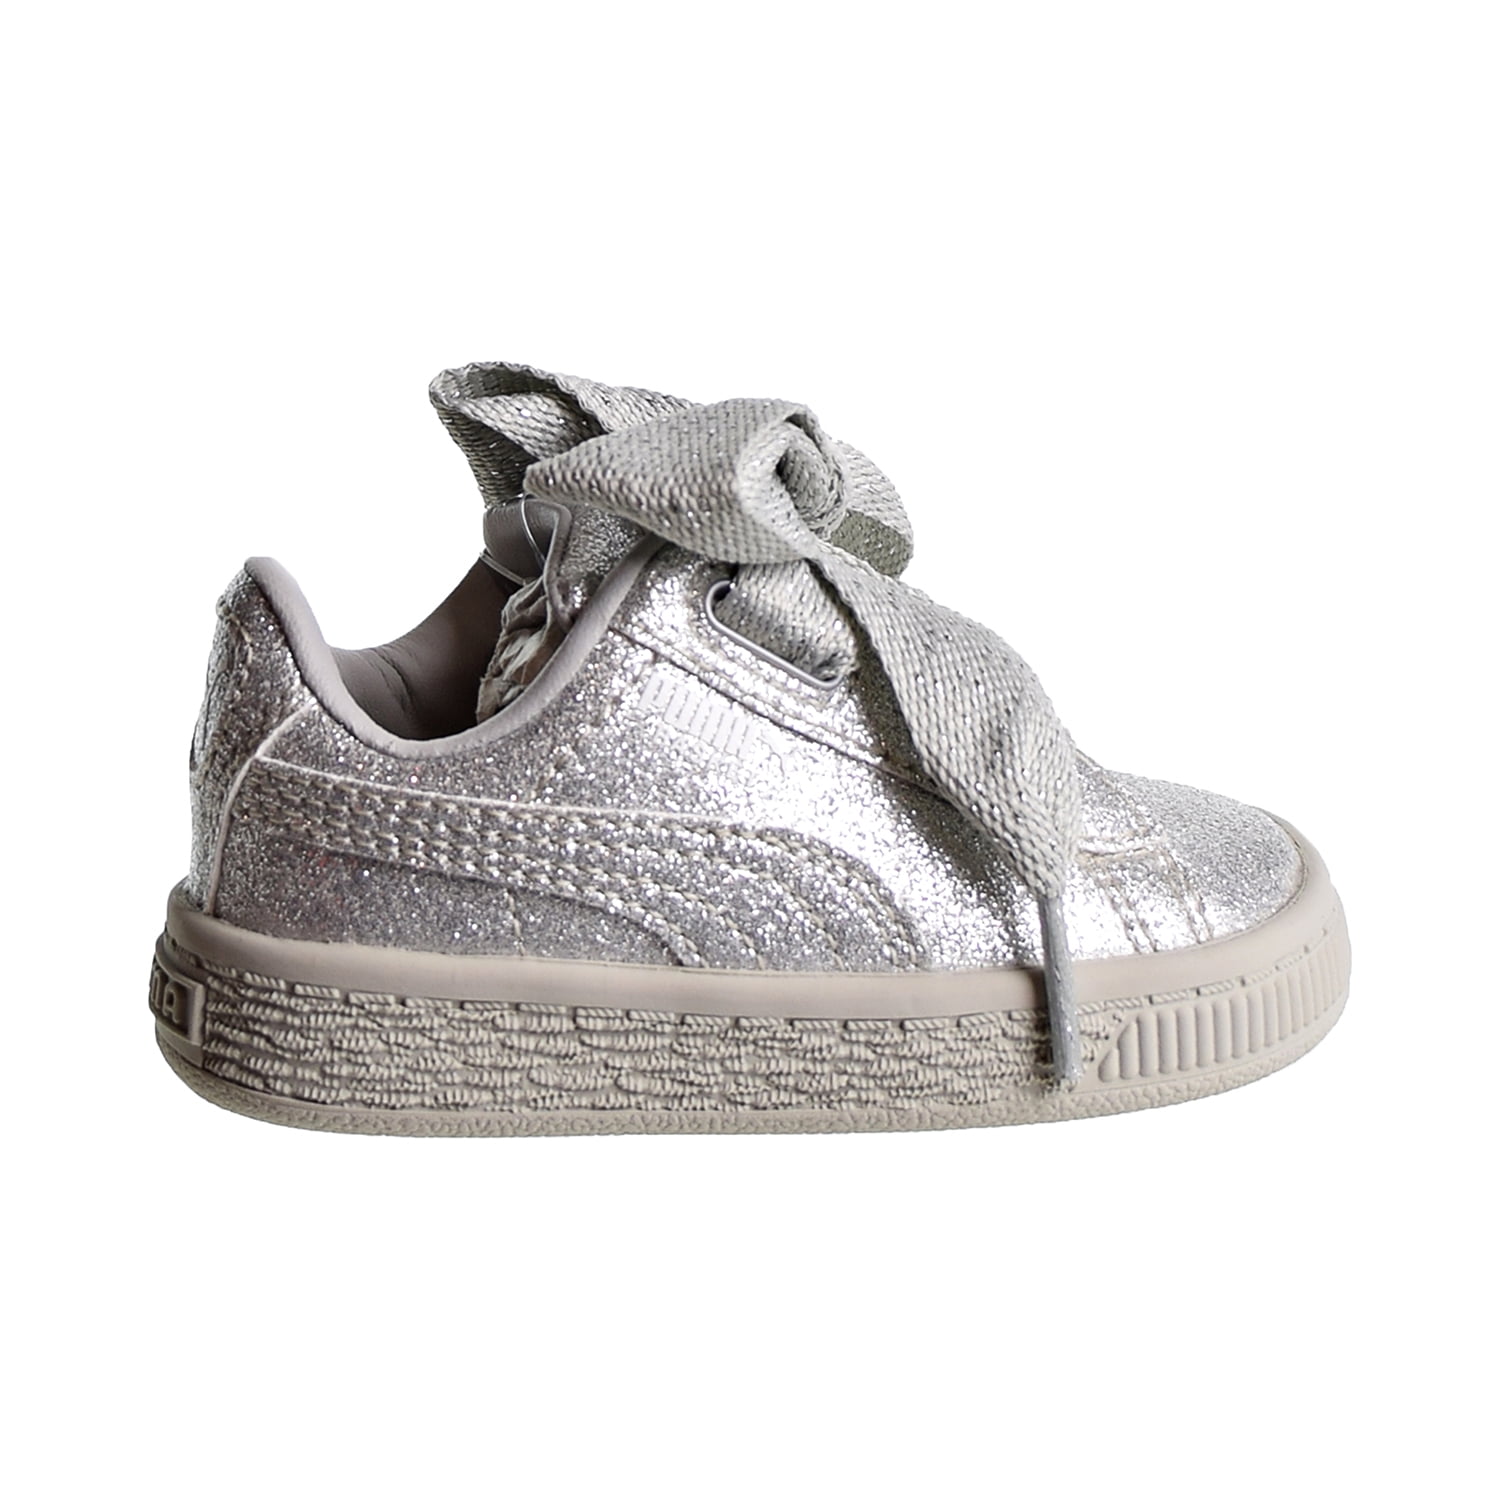 Puma Basket Heart Holiday Glamour Toddler's Shoes Silver/Gray/Violet 367632-03